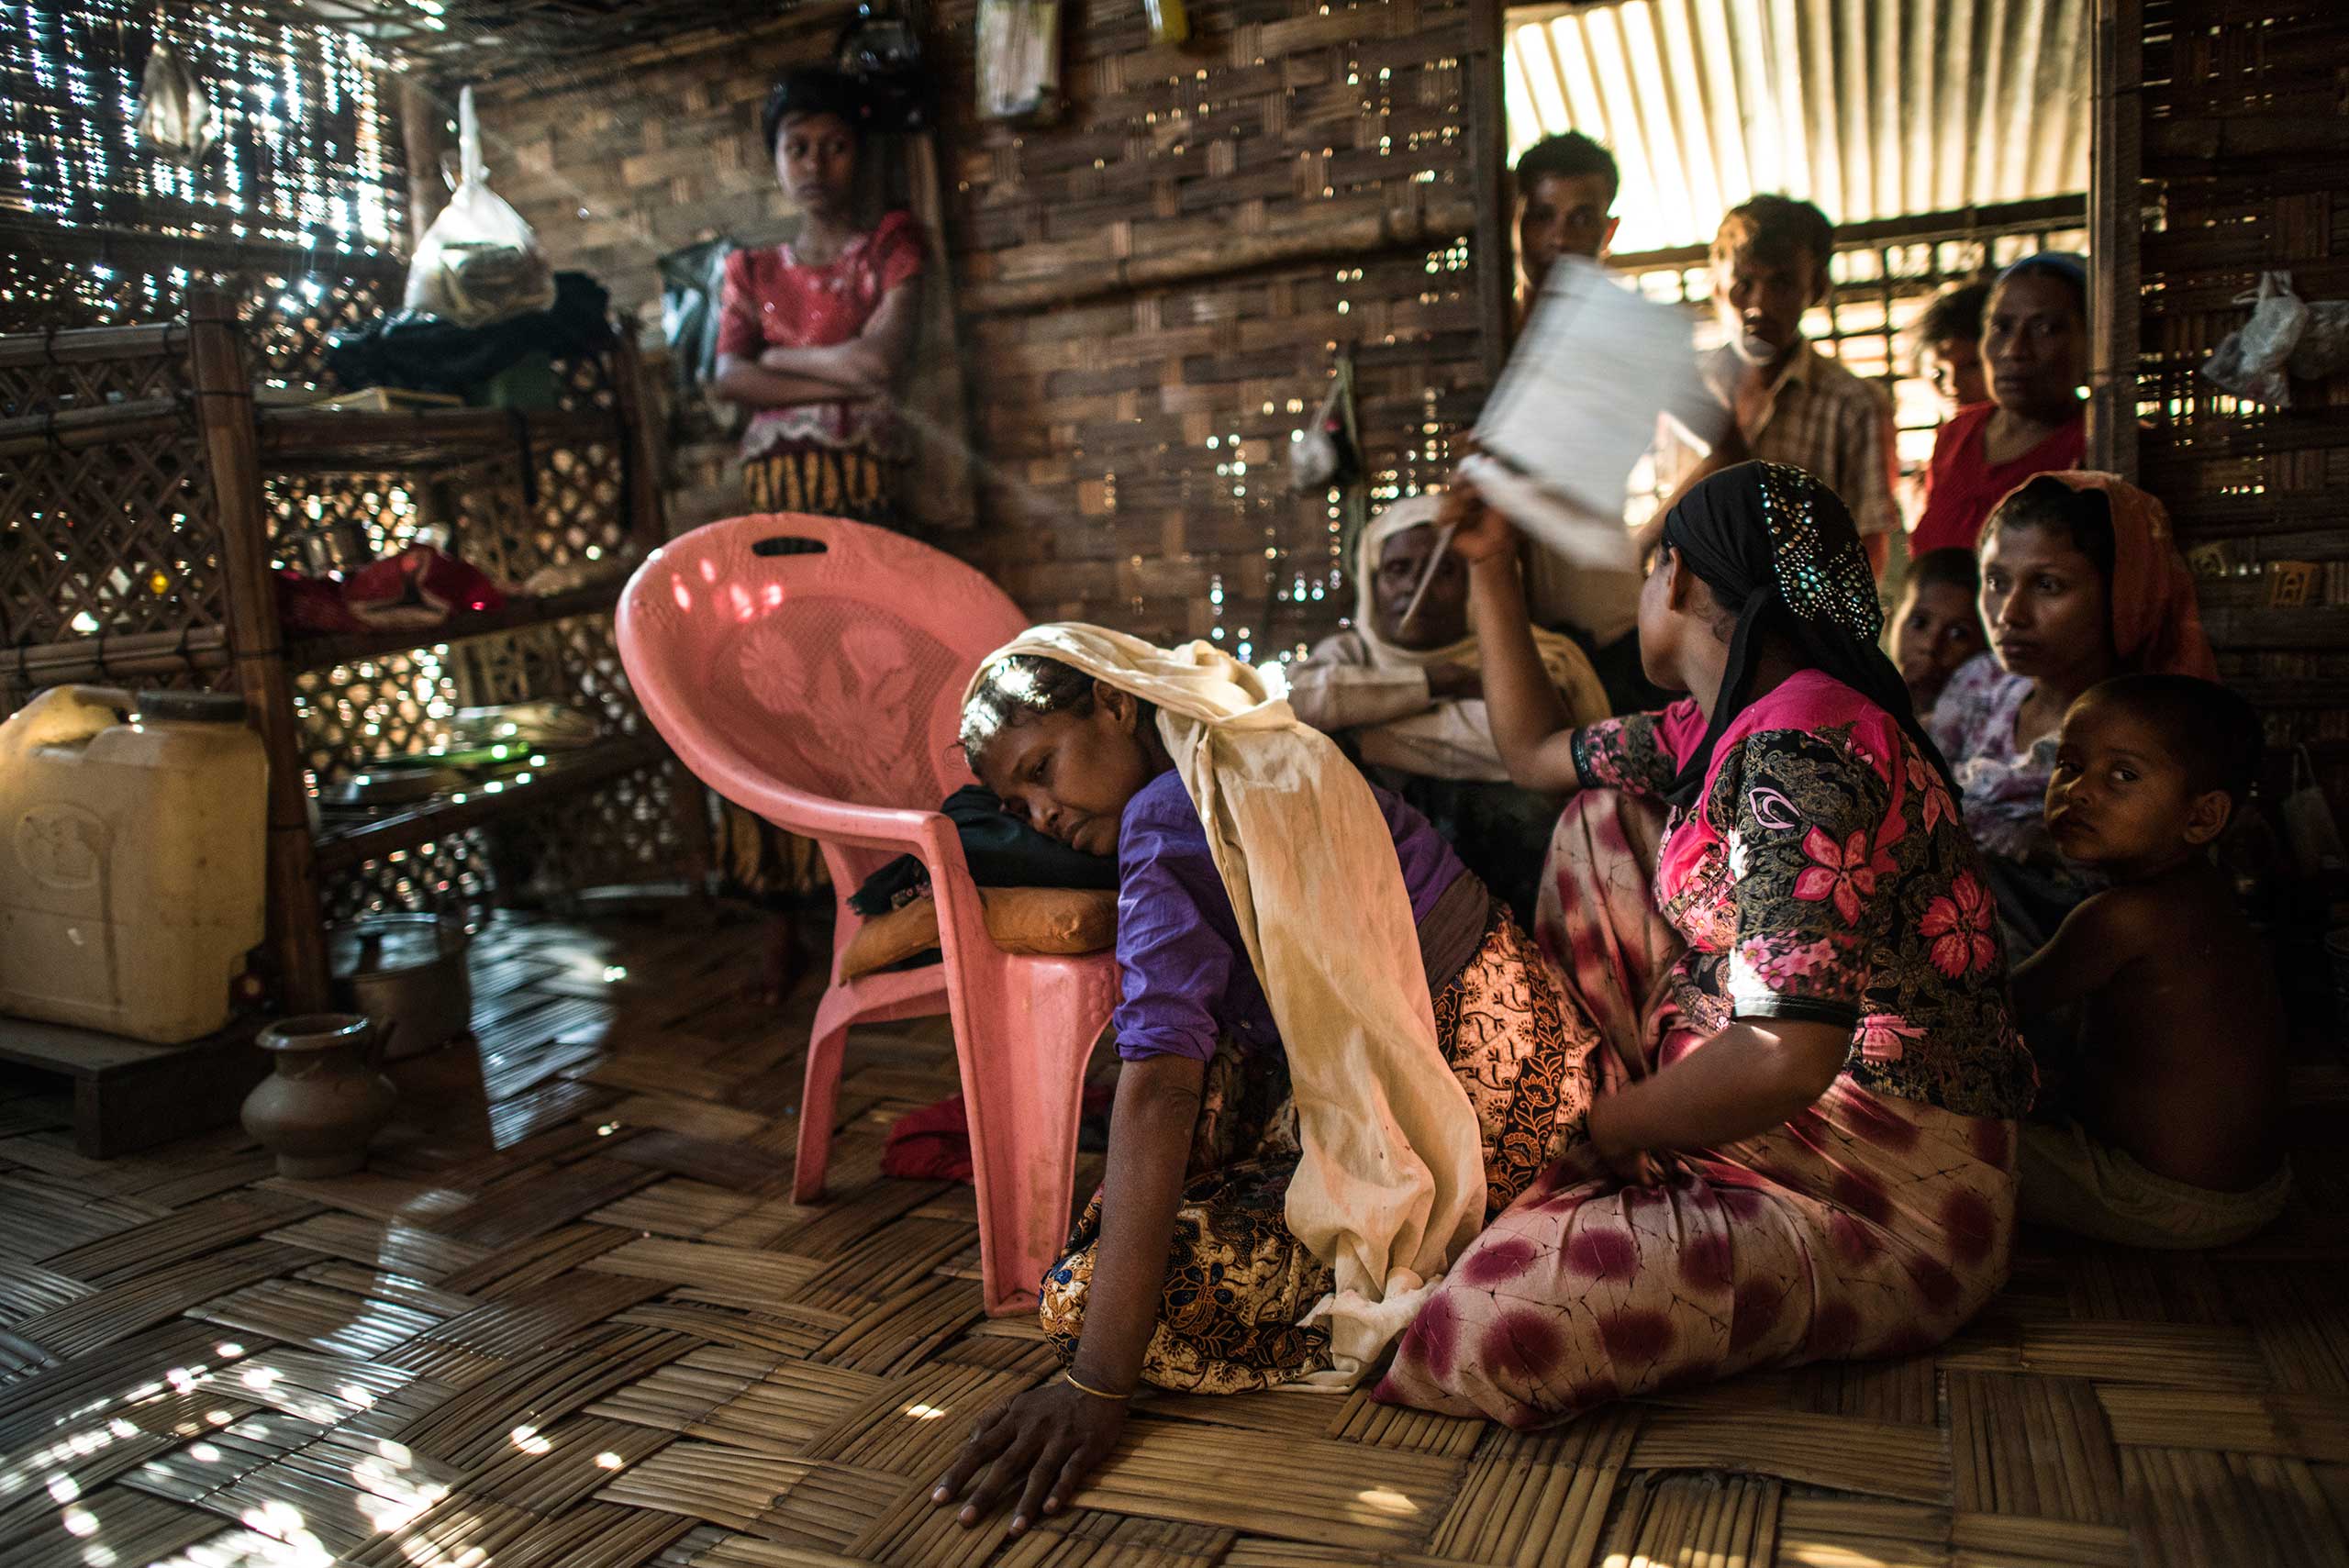 Moriam Katu, 50, who is gravely ill from severe asthma, is comforted by her daughters and other loved ones in the Ba Du Paw camp for Internally Displaced Rohingya around Sittwe, in Myanmar. Moriam was so ill, she could barely breathe, and began coughing up blood.  She visited the emergency hospital at the That Kay Pin within the IDP camp, and there were not sufficient resources to treat her there. The medical advisor offered to transfer her to the government hospital in Sittwe, but she declined, because her family did not have enough money to keep her there.  While her medical treatment would be free, her guardian would need to pay for food, which they estimated would be 20-30000 for food for a week. She declined and went back home. A few days later, she returned, and was transferred to Sittwe hospital, and died 10 days later.